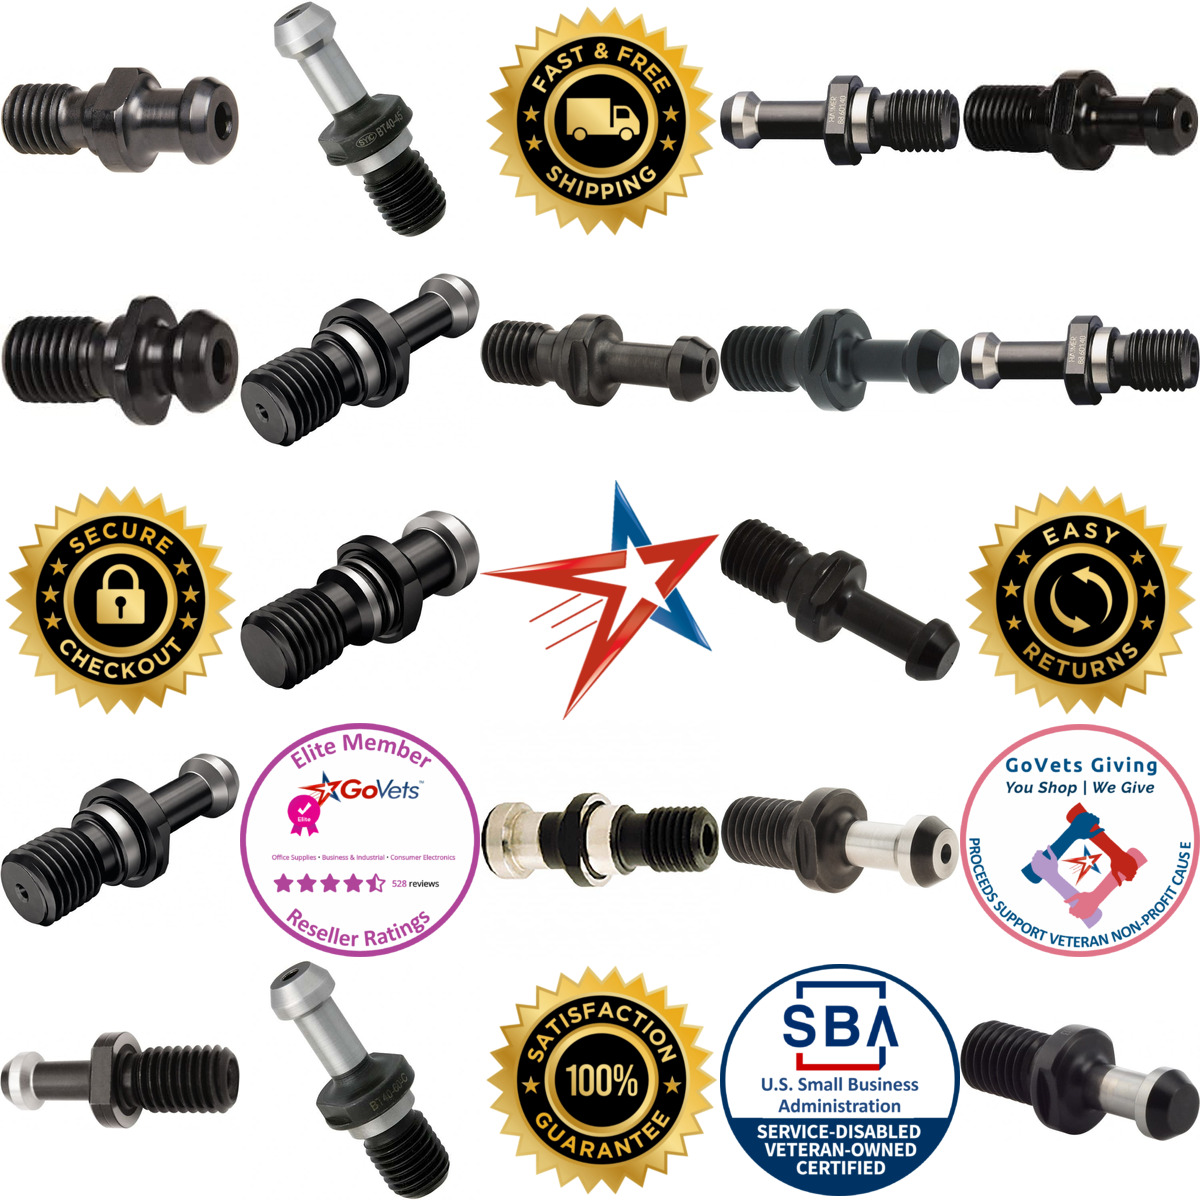 A selection of Retention Knobs and Sockets products on GoVets